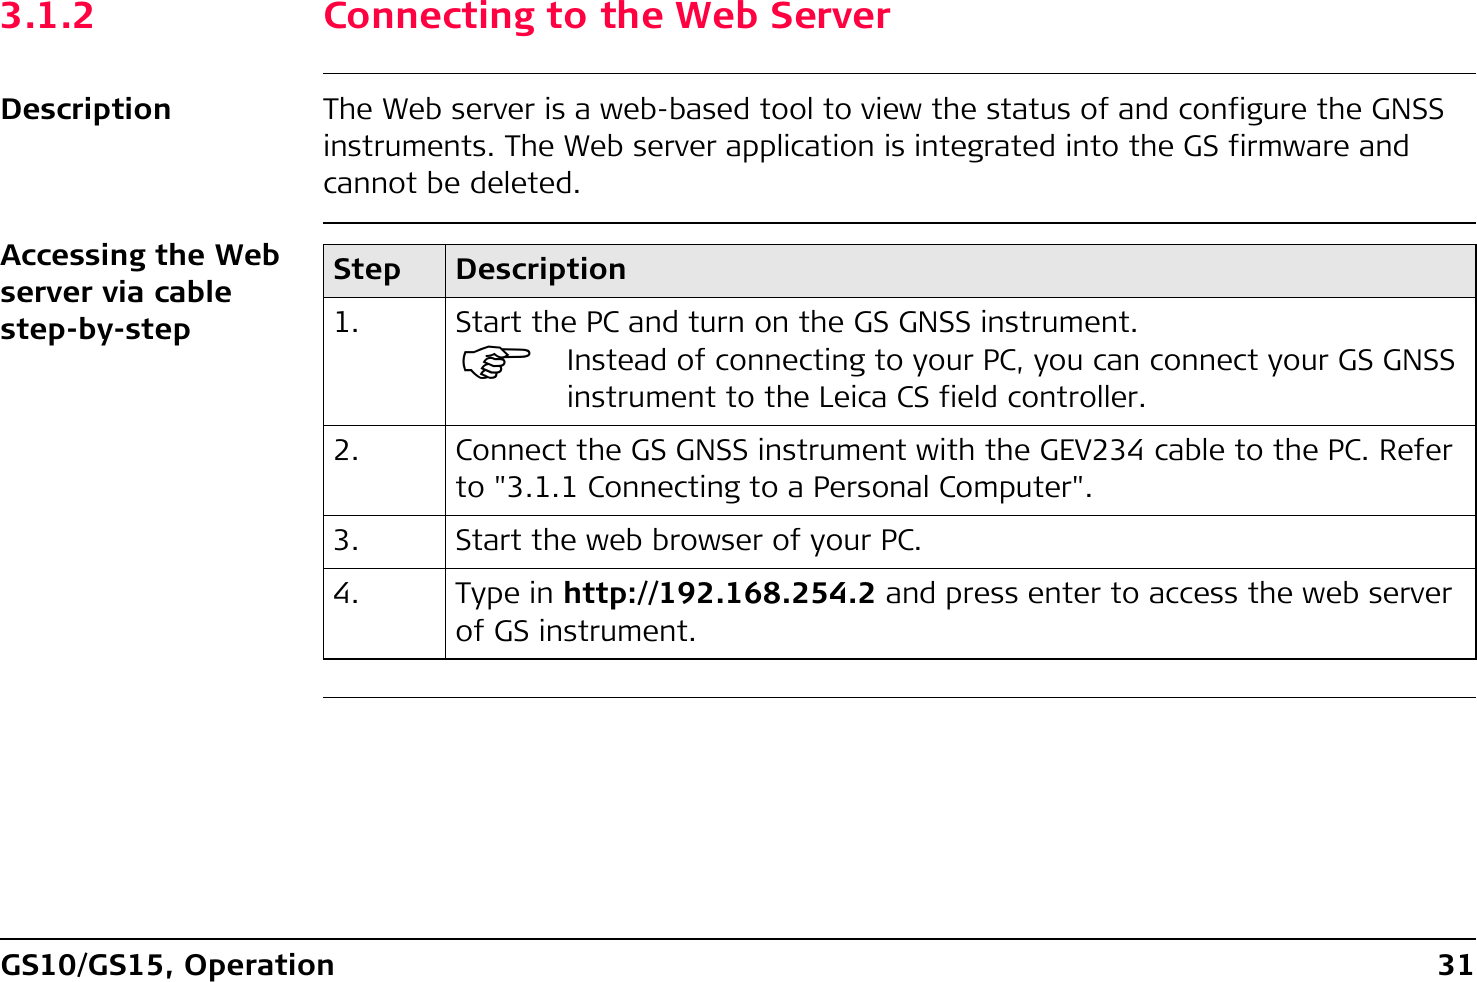 GS10/GS15, Operation 313.1.2 Connecting to the Web ServerDescription The Web server is a web-based tool to view the status of and configure the GNSS instruments. The Web server application is integrated into the GS firmware and cannot be deleted.Accessing the Web server via cable step-by-stepStep Description1. Start the PC and turn on the GS GNSS instrument.)Instead of connecting to your PC, you can connect your GS GNSS instrument to the Leica CS field controller.2. Connect the GS GNSS instrument with the GEV234 cable to the PC. Refer to &quot;3.1.1 Connecting to a Personal Computer&quot;.3. Start the web browser of your PC.4. Type in http://192.168.254.2 and press enter to access the web server of GS instrument.